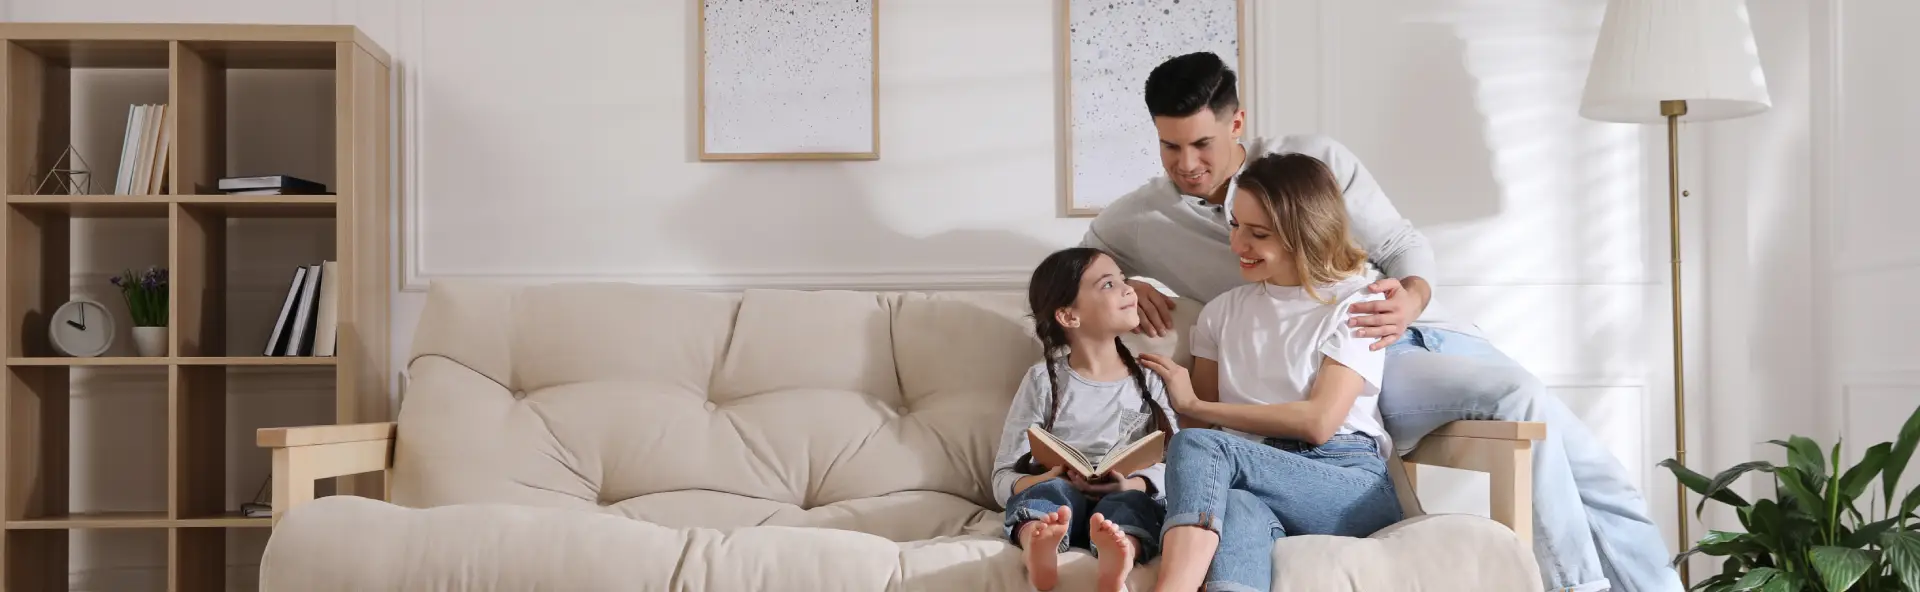 Mother, Father and daughter reading together on couch